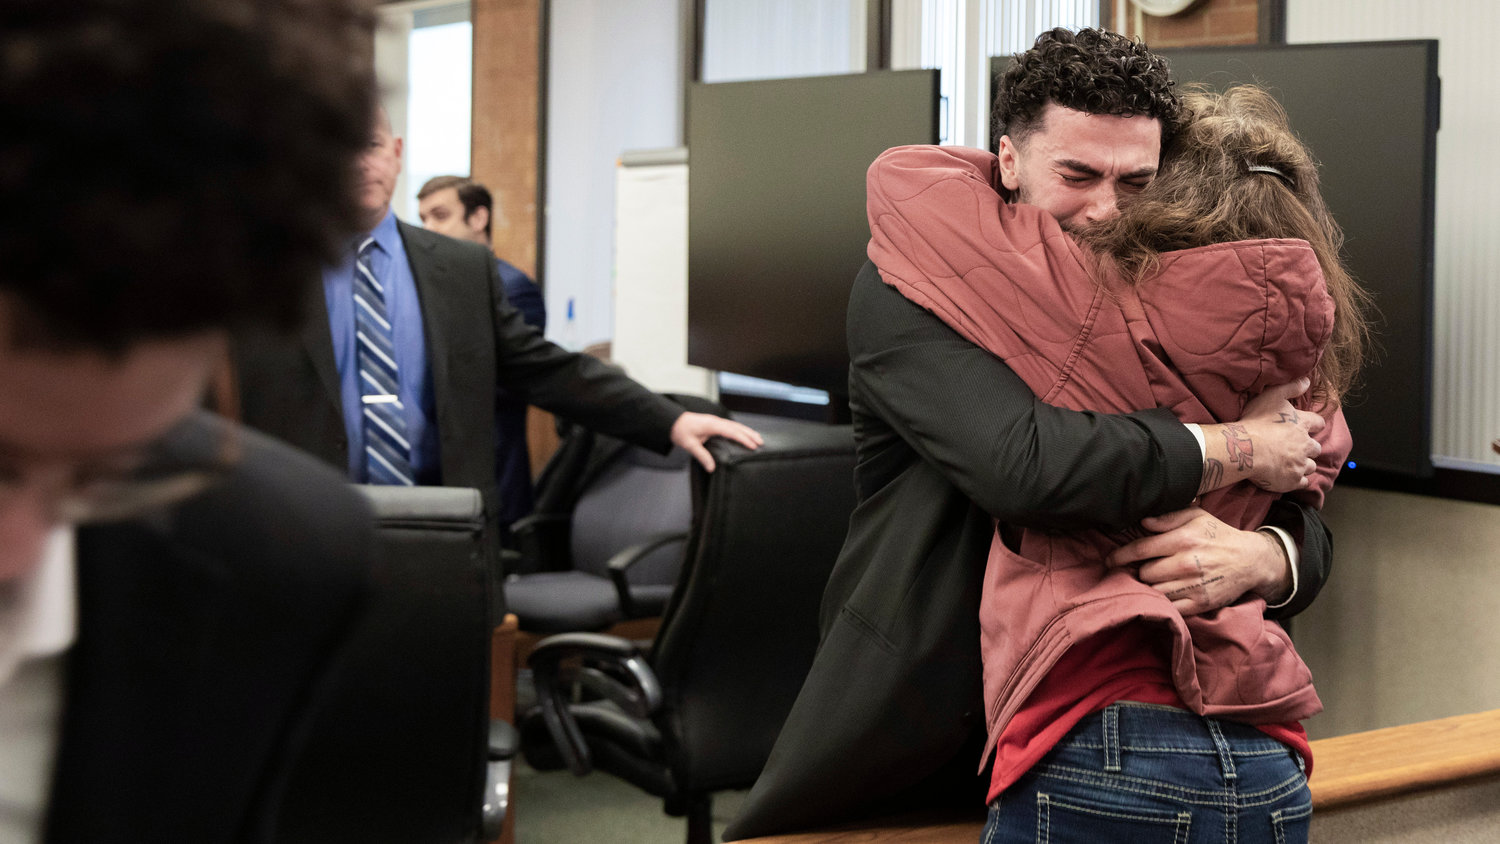 Joshua Darrow, known professionally as “Band Kid Jay,” receives an embrace while reacting to a not-guilty verdict reached by a jury in Lewis County Superior Court on Thursday in Chehalis.